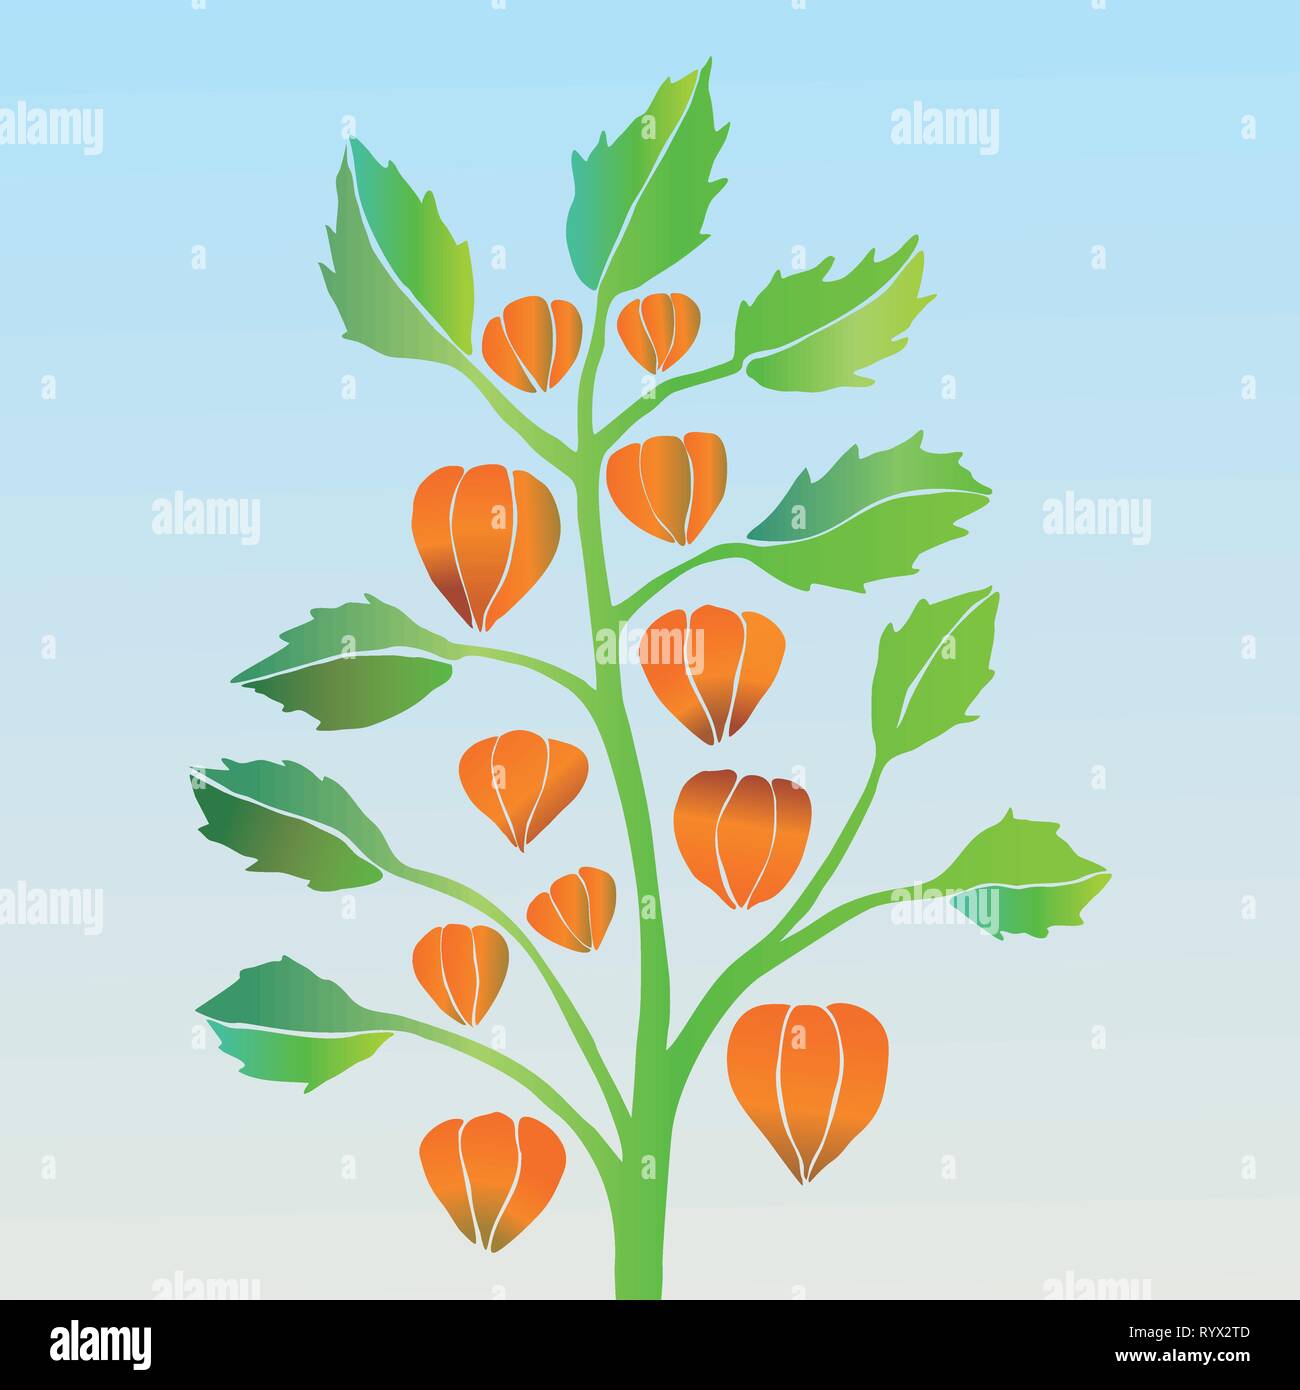 A vector illustration of a physalis. Stock Vector